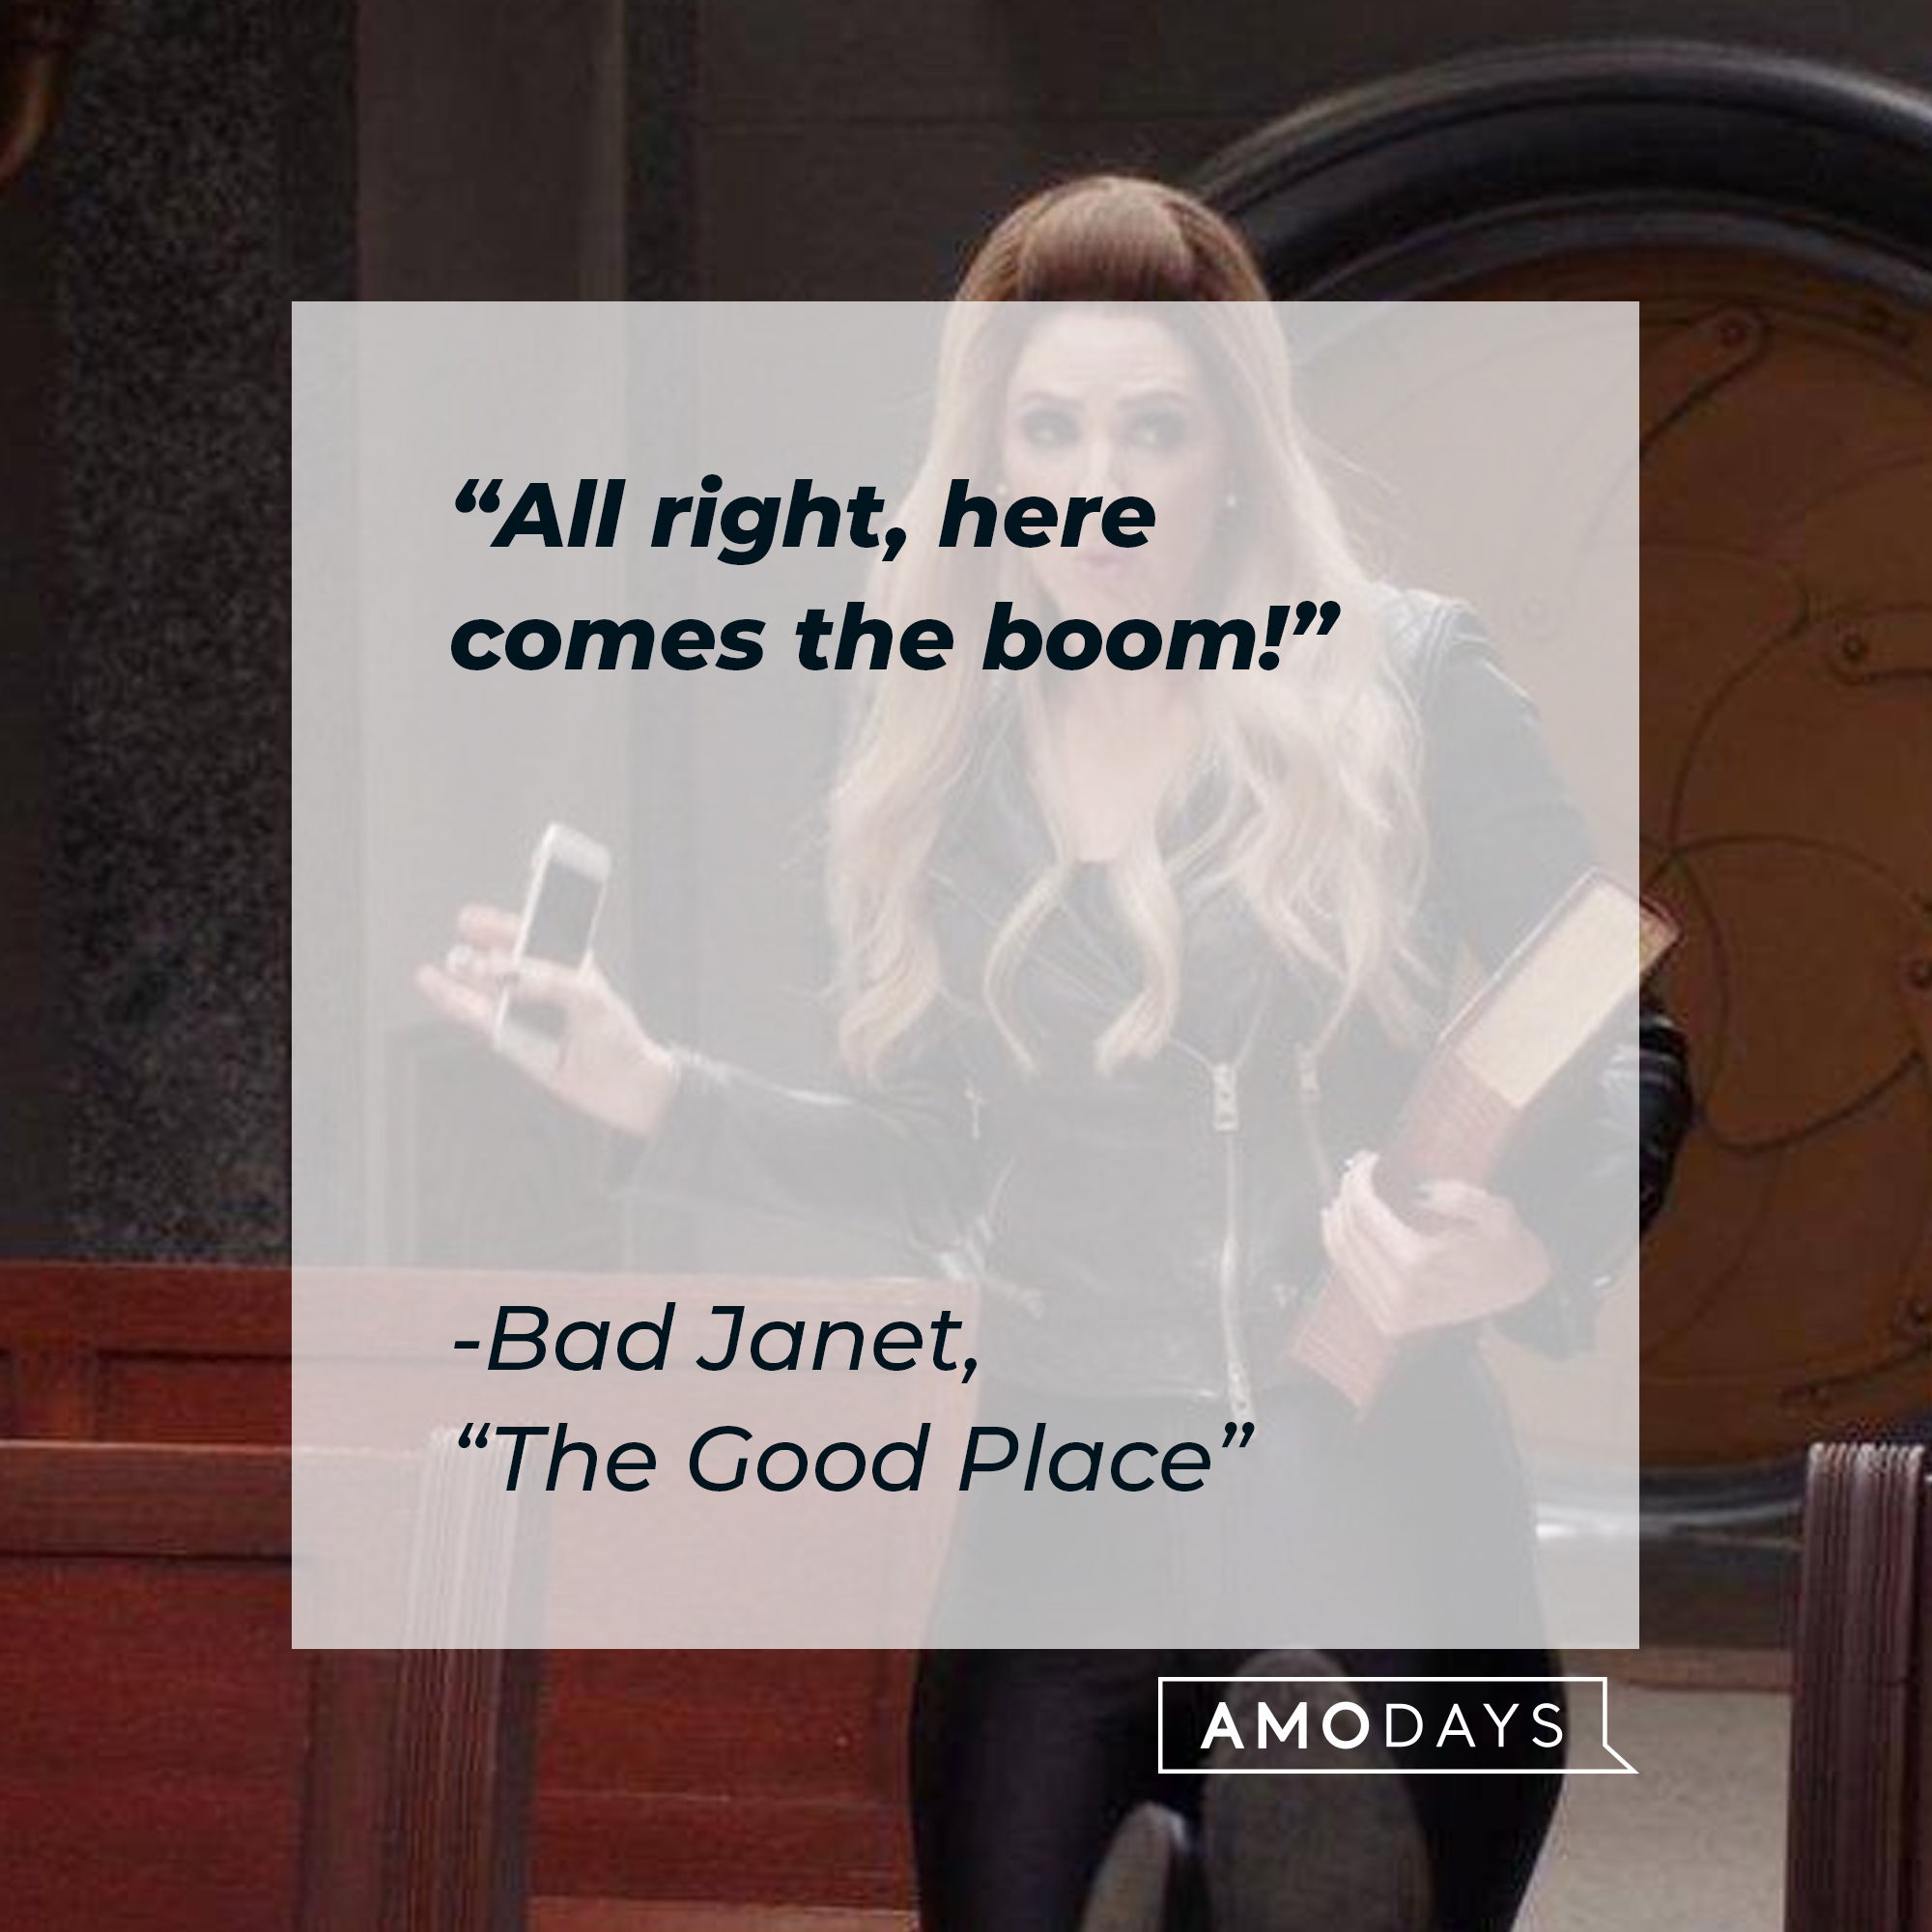 Janet's quote: “All right, here comes the boom!" | Source: facebook.com/NBCTheGoodPlace